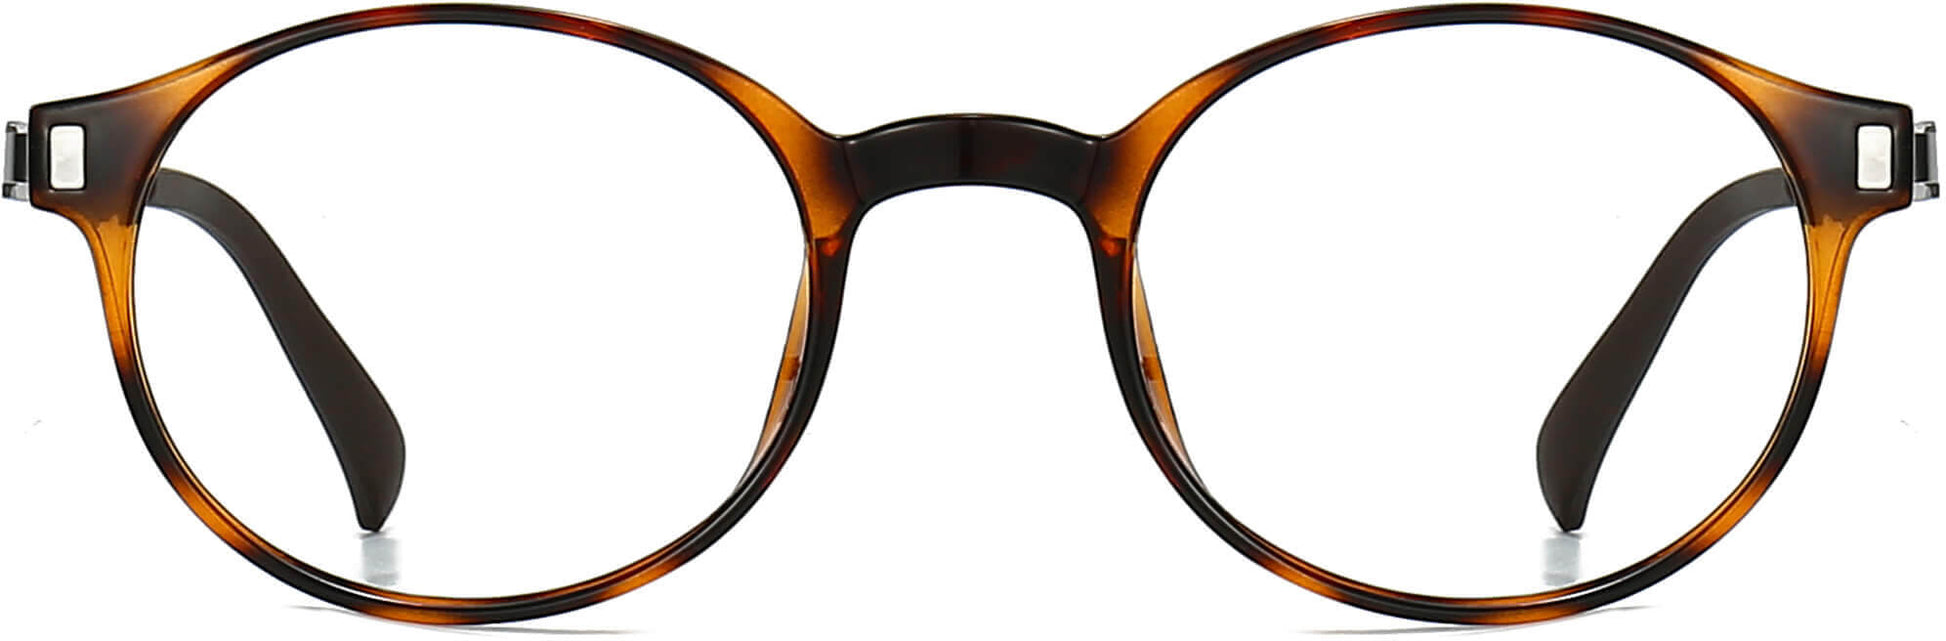 Shelby Round Tortoise Eyeglasses from ANRRI, front view